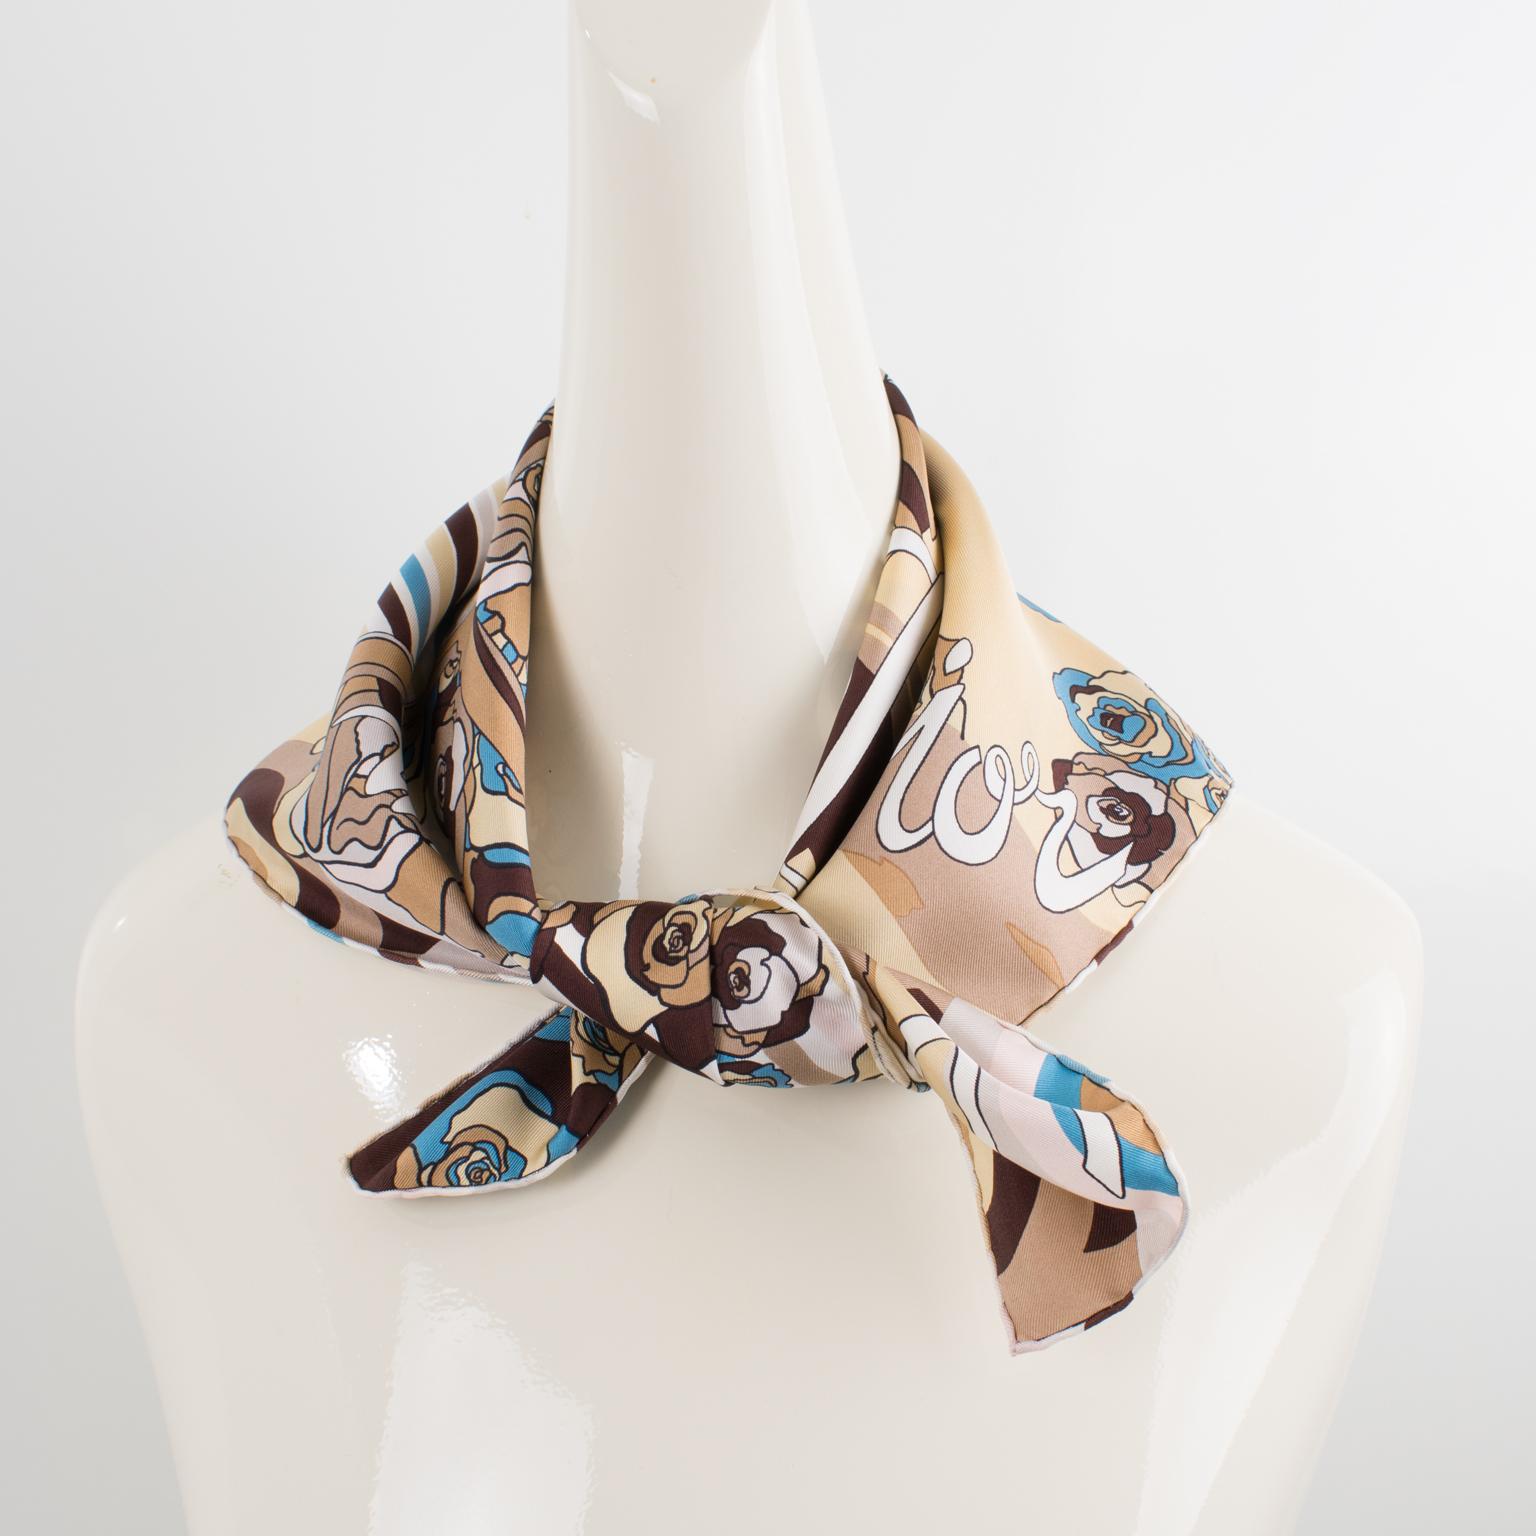 This beautiful silk scarf by Christian Dior in blue and beige colors features the iconic Dior chair design print with a large Christian Dior signature name blending into the design. The combination of colors is bright and vibrant, with pale pink,